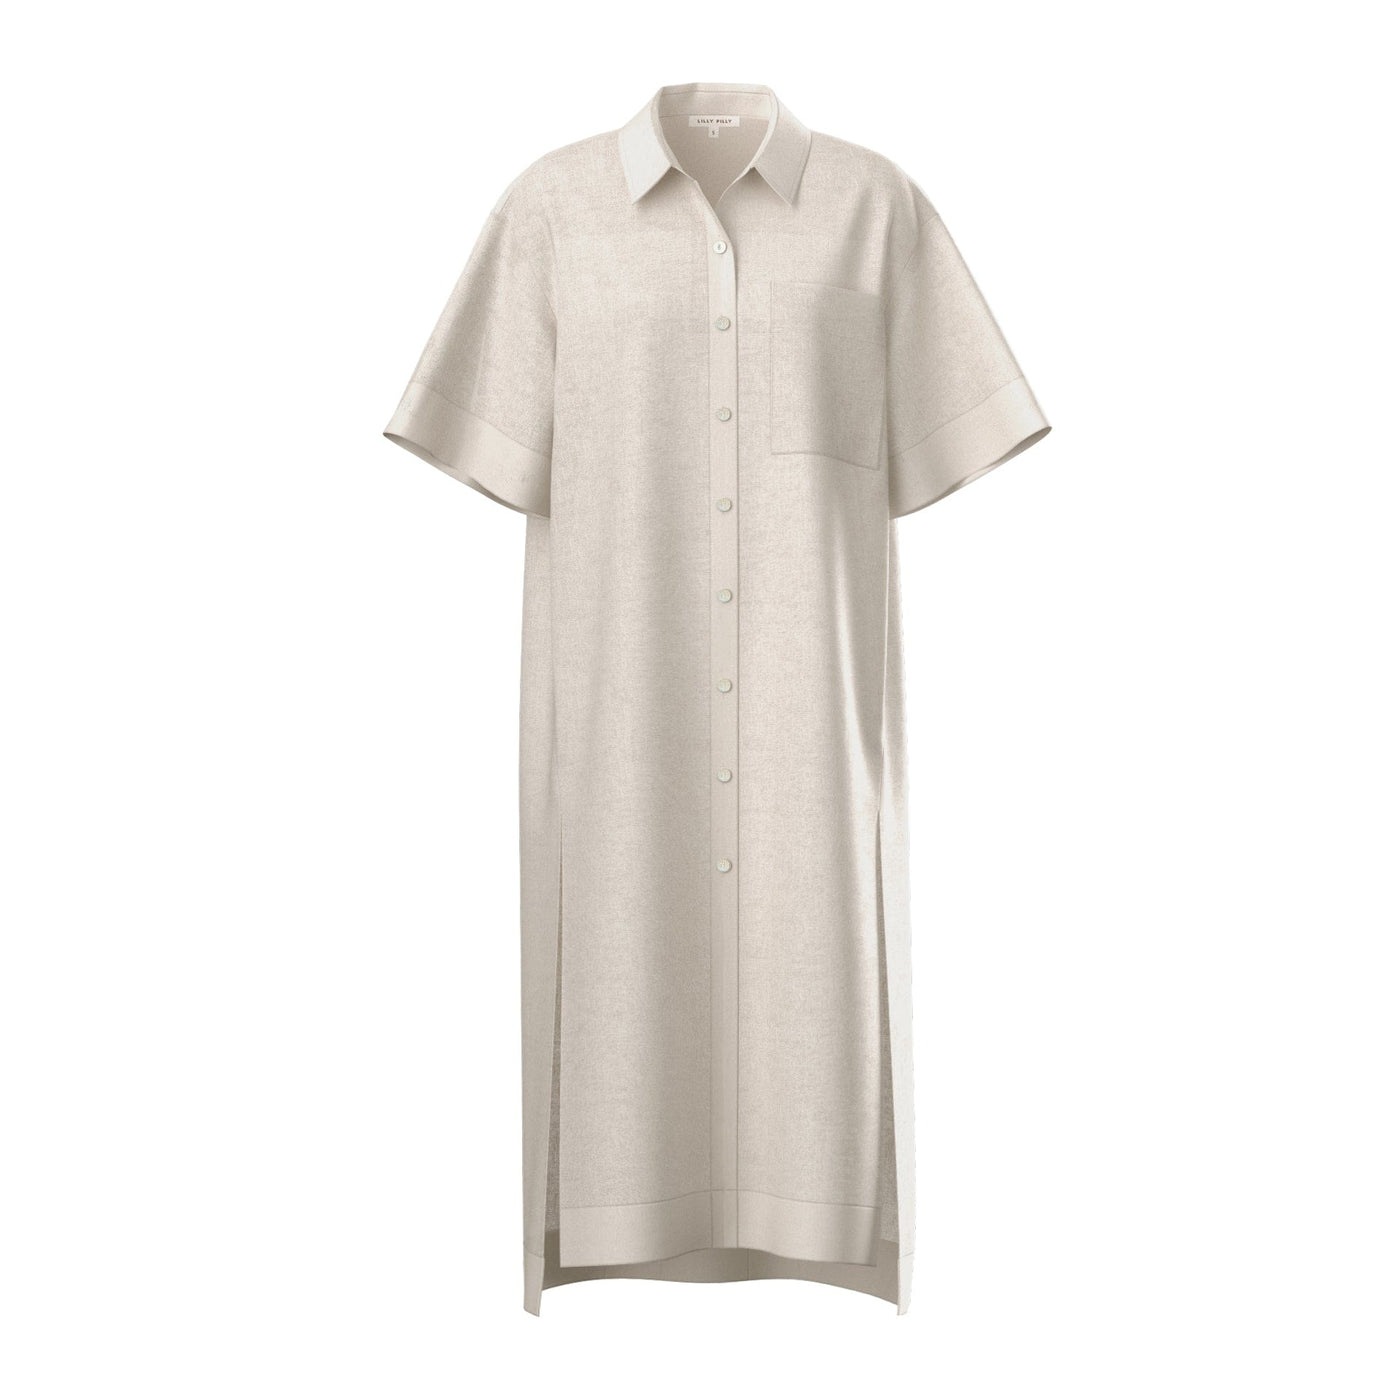 LILLY PILLY Collection Carly shirt made from 100% Organic linen in Oatmeal, as 3D model showing front view